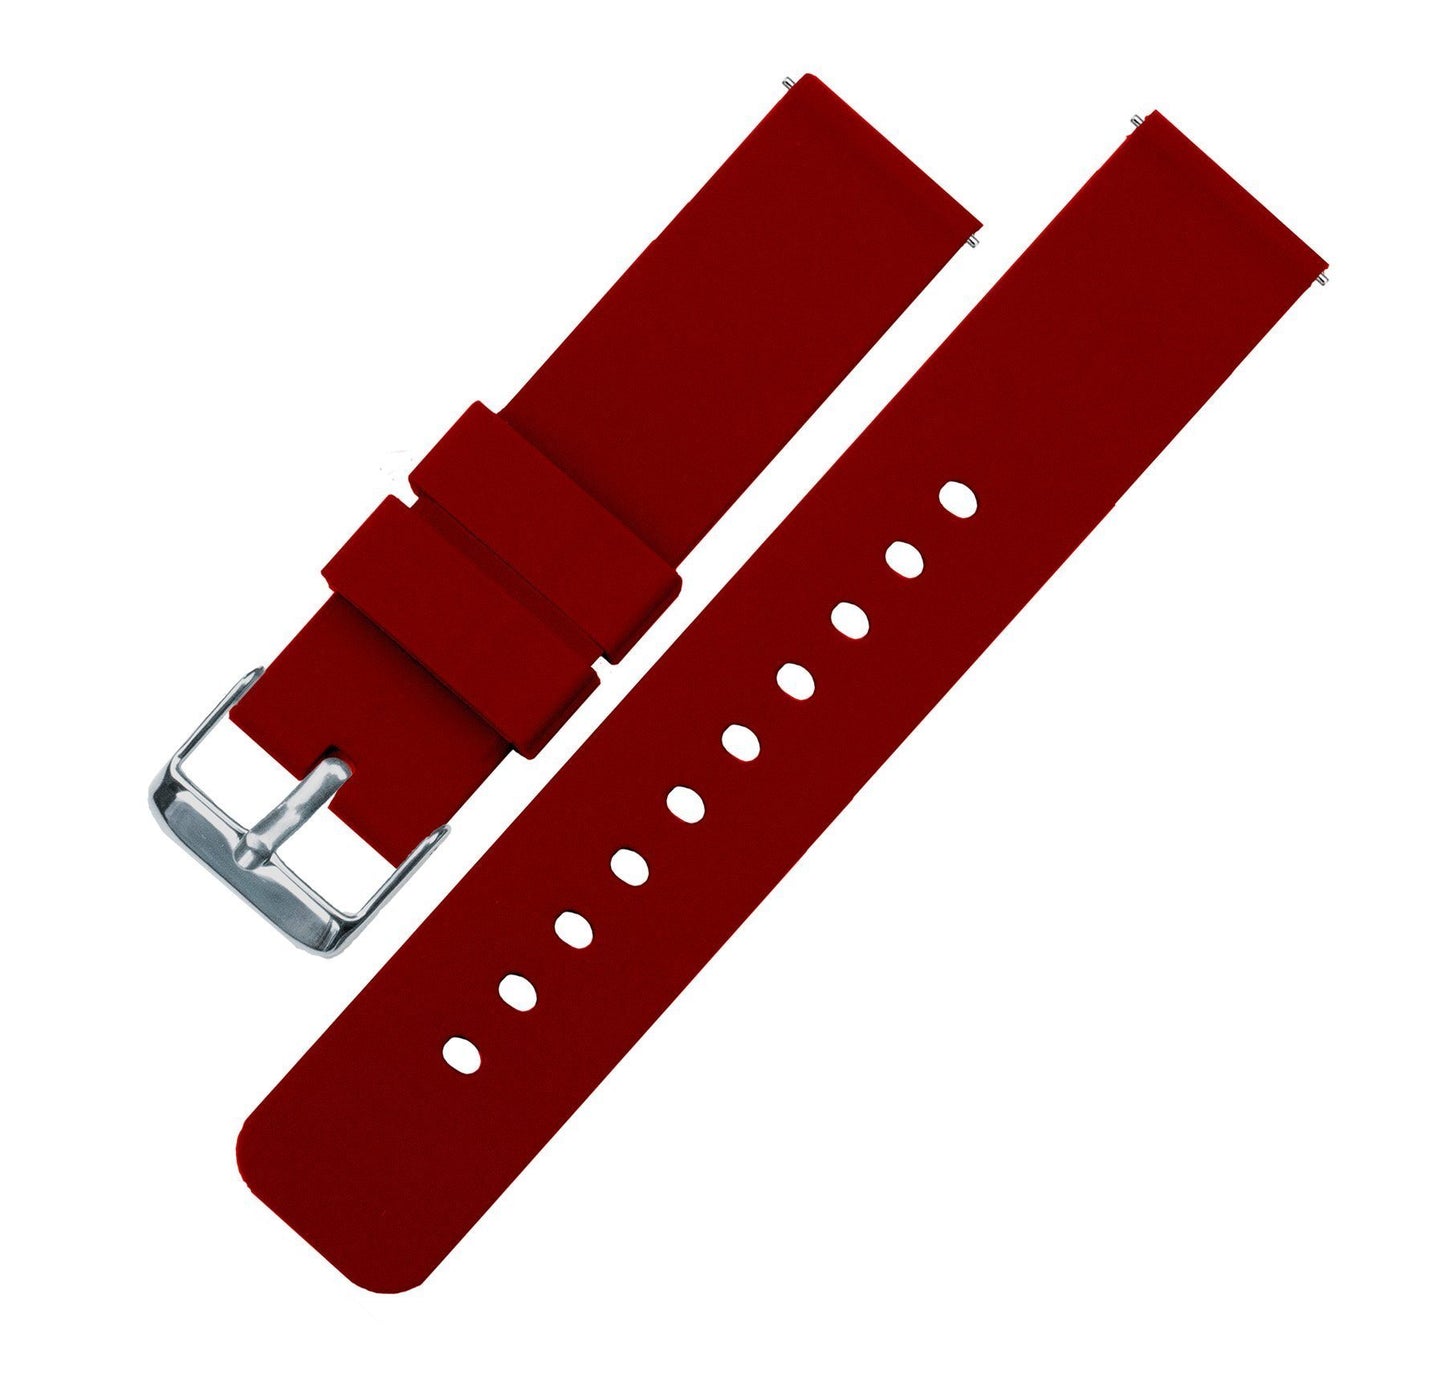 Withings Nokia Activité and Steel HR | Silicone | Crimson Red - Barton Watch Bands